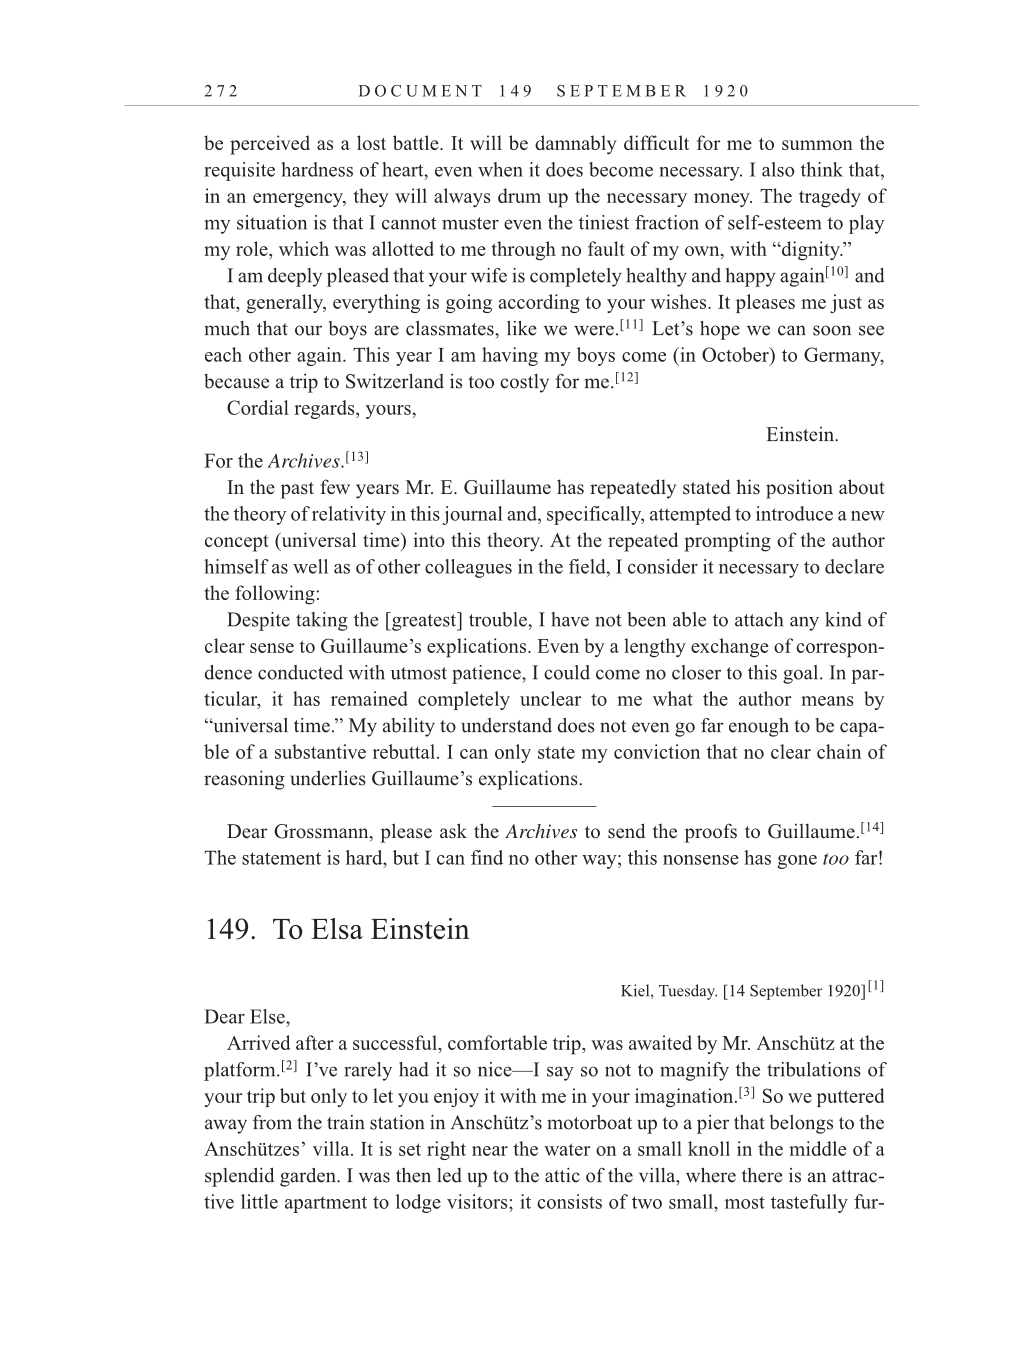 Volume 10: The Berlin Years: Correspondence, May-December 1920, and Supplementary Correspondence, 1909-1920 (English translation supplement) page 272